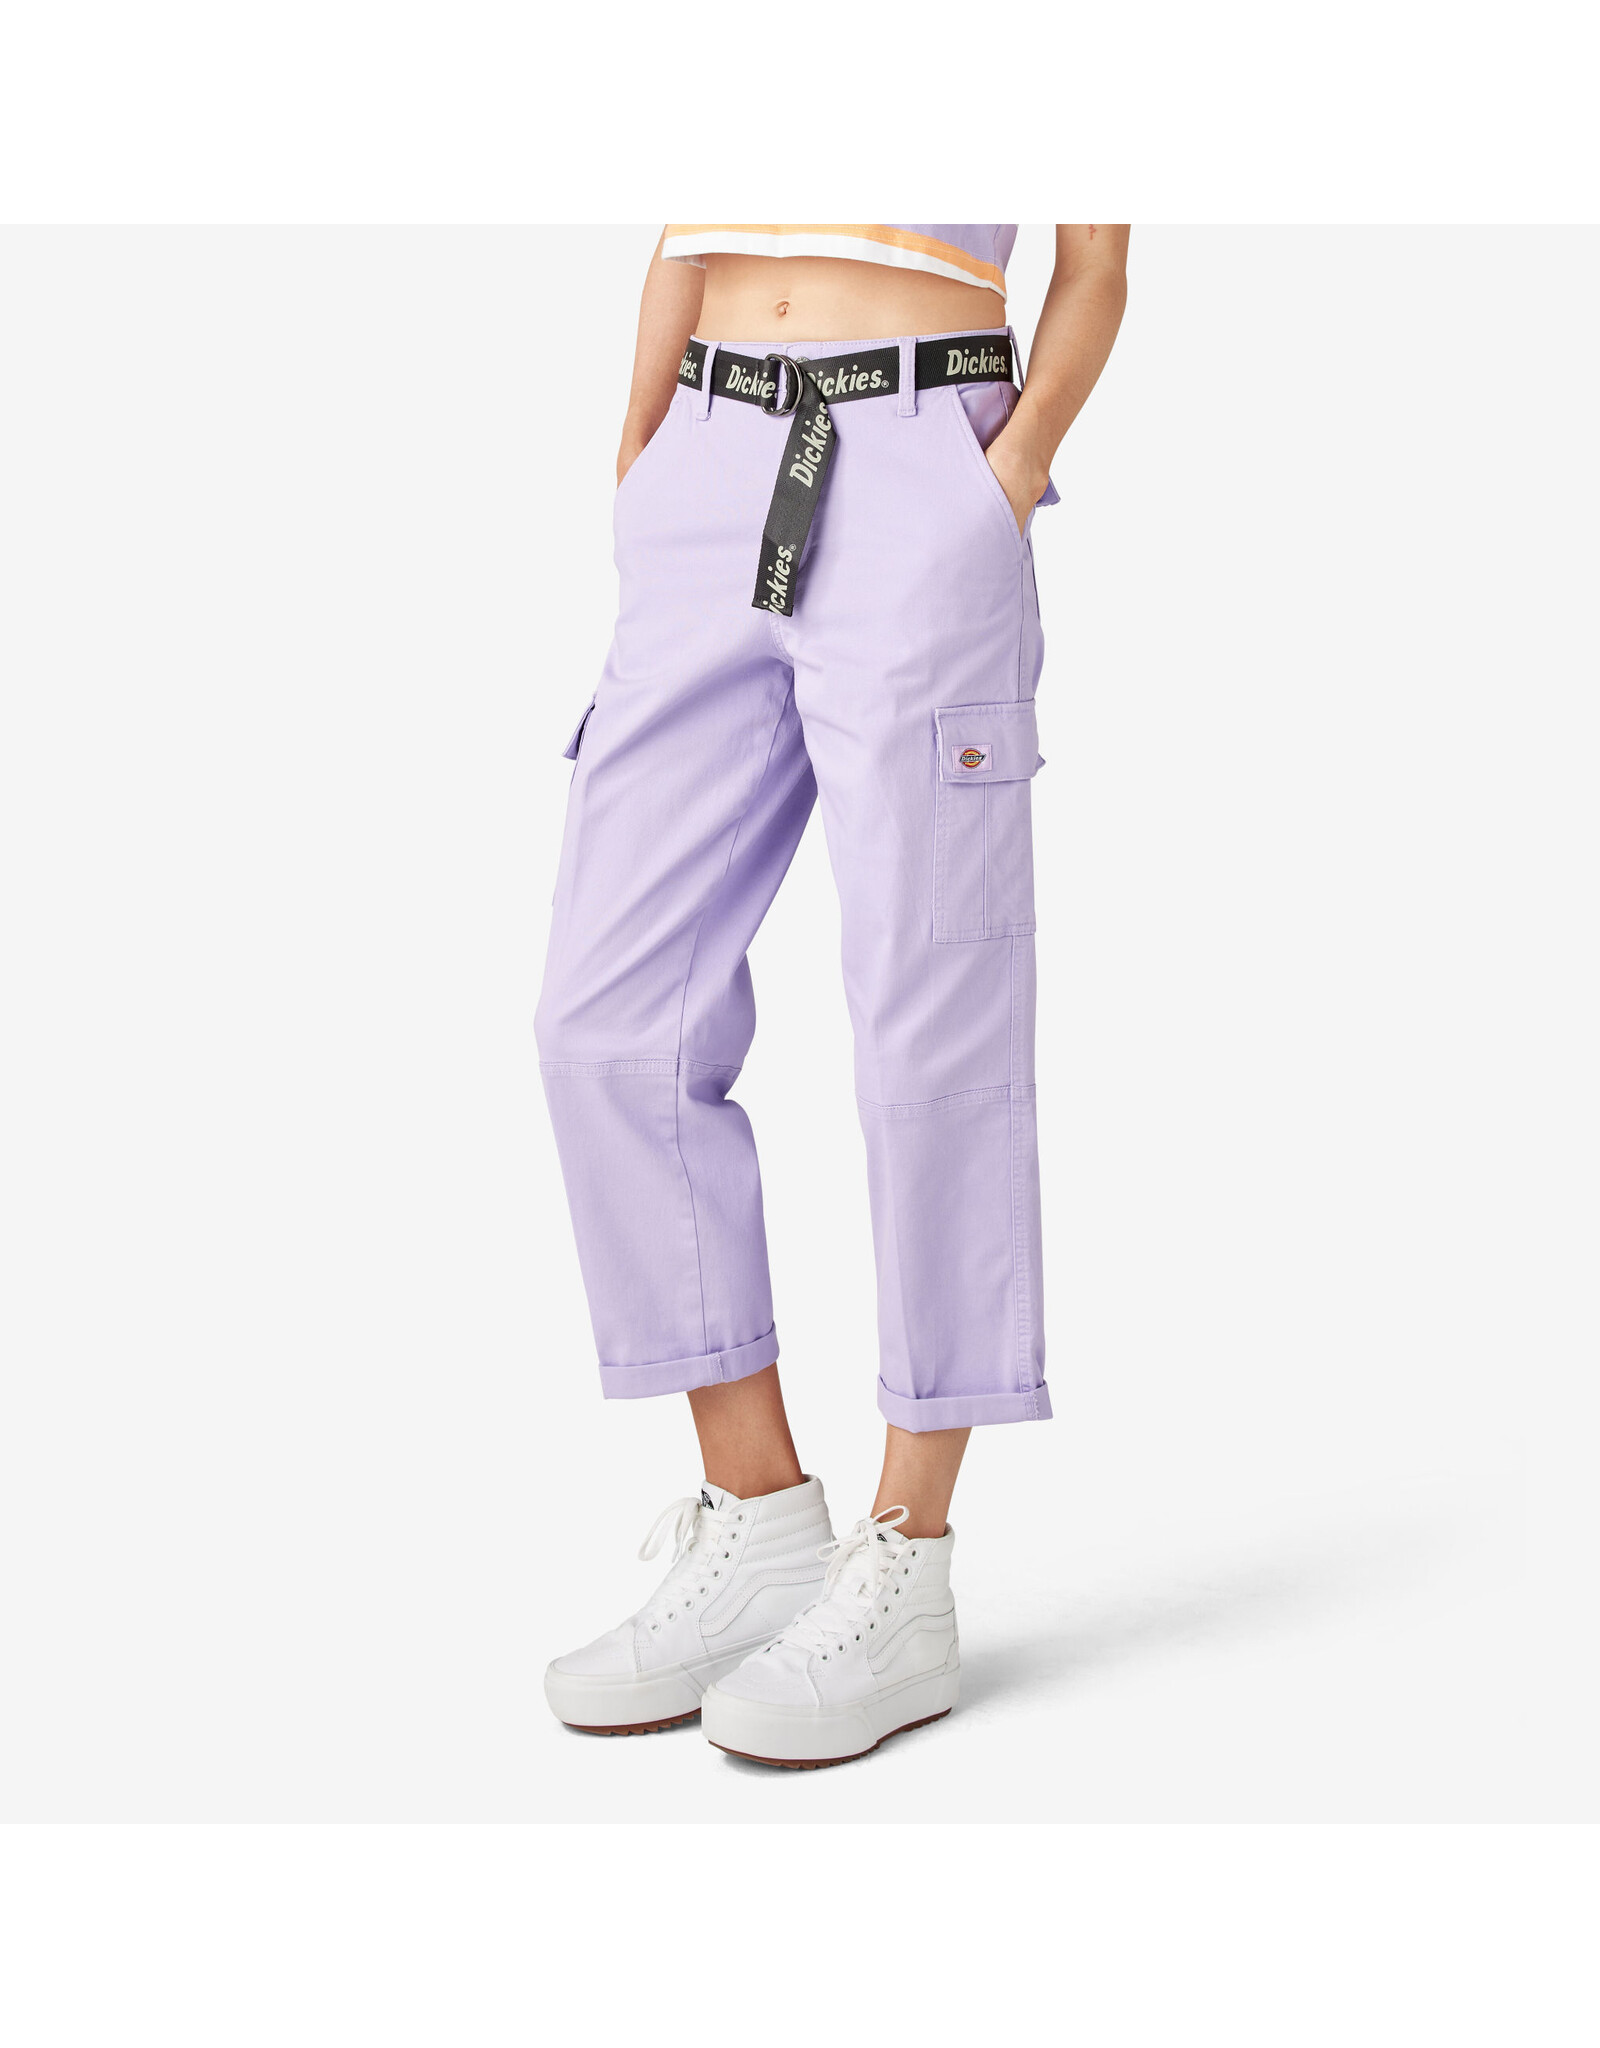 DICKIES Women's Relaxed Fit Cropped Cargo Pants Purple Rose - FPR50UR2